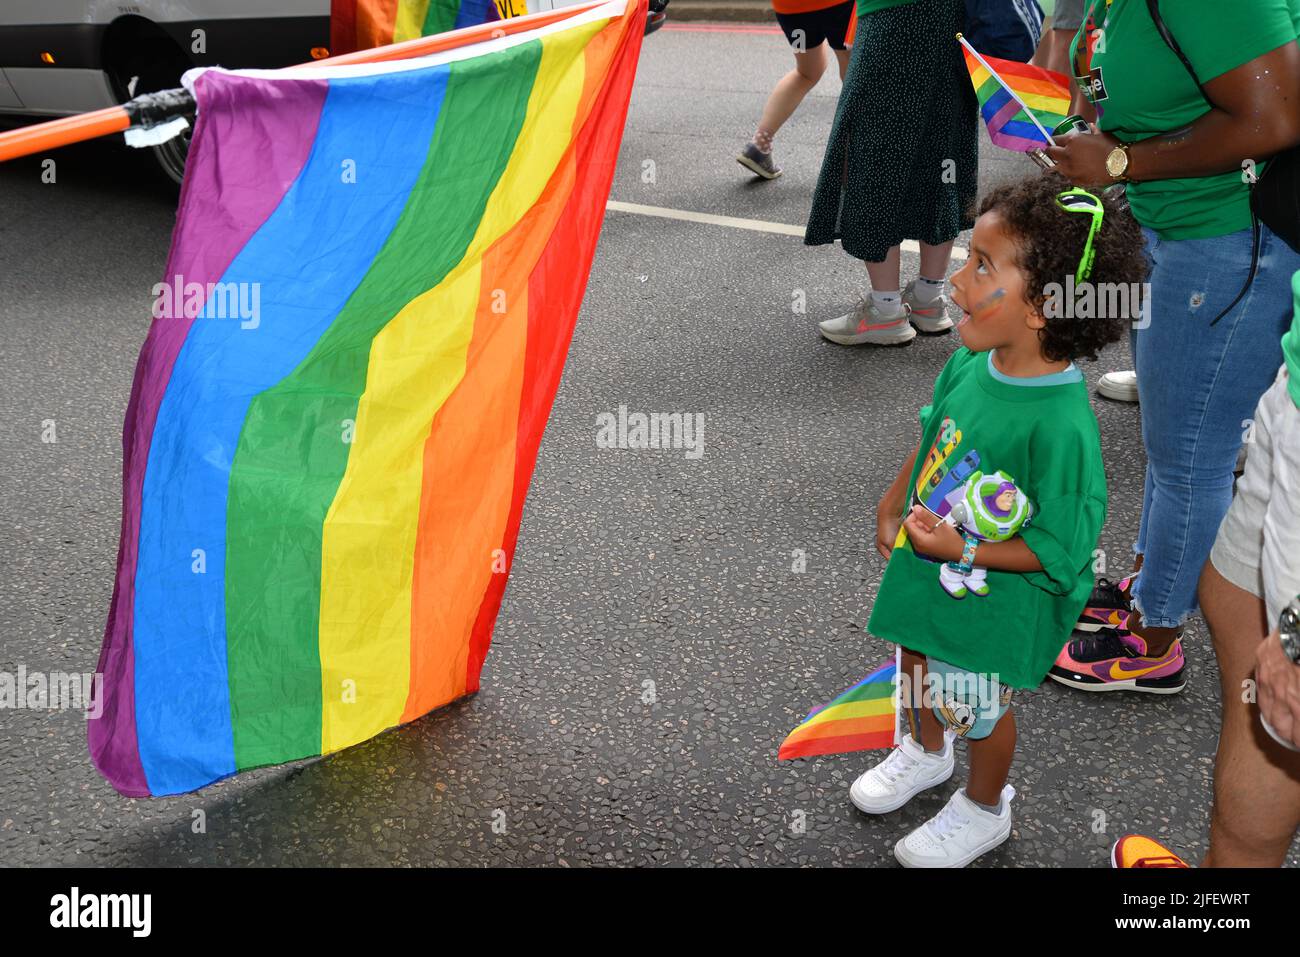 Young child, child, Rainbow Flag, Pride, Pride 50, Celebrations, LGBT, LGBTQ, Youngster, Parade, Green, Amazement, Colourful Stock Photo